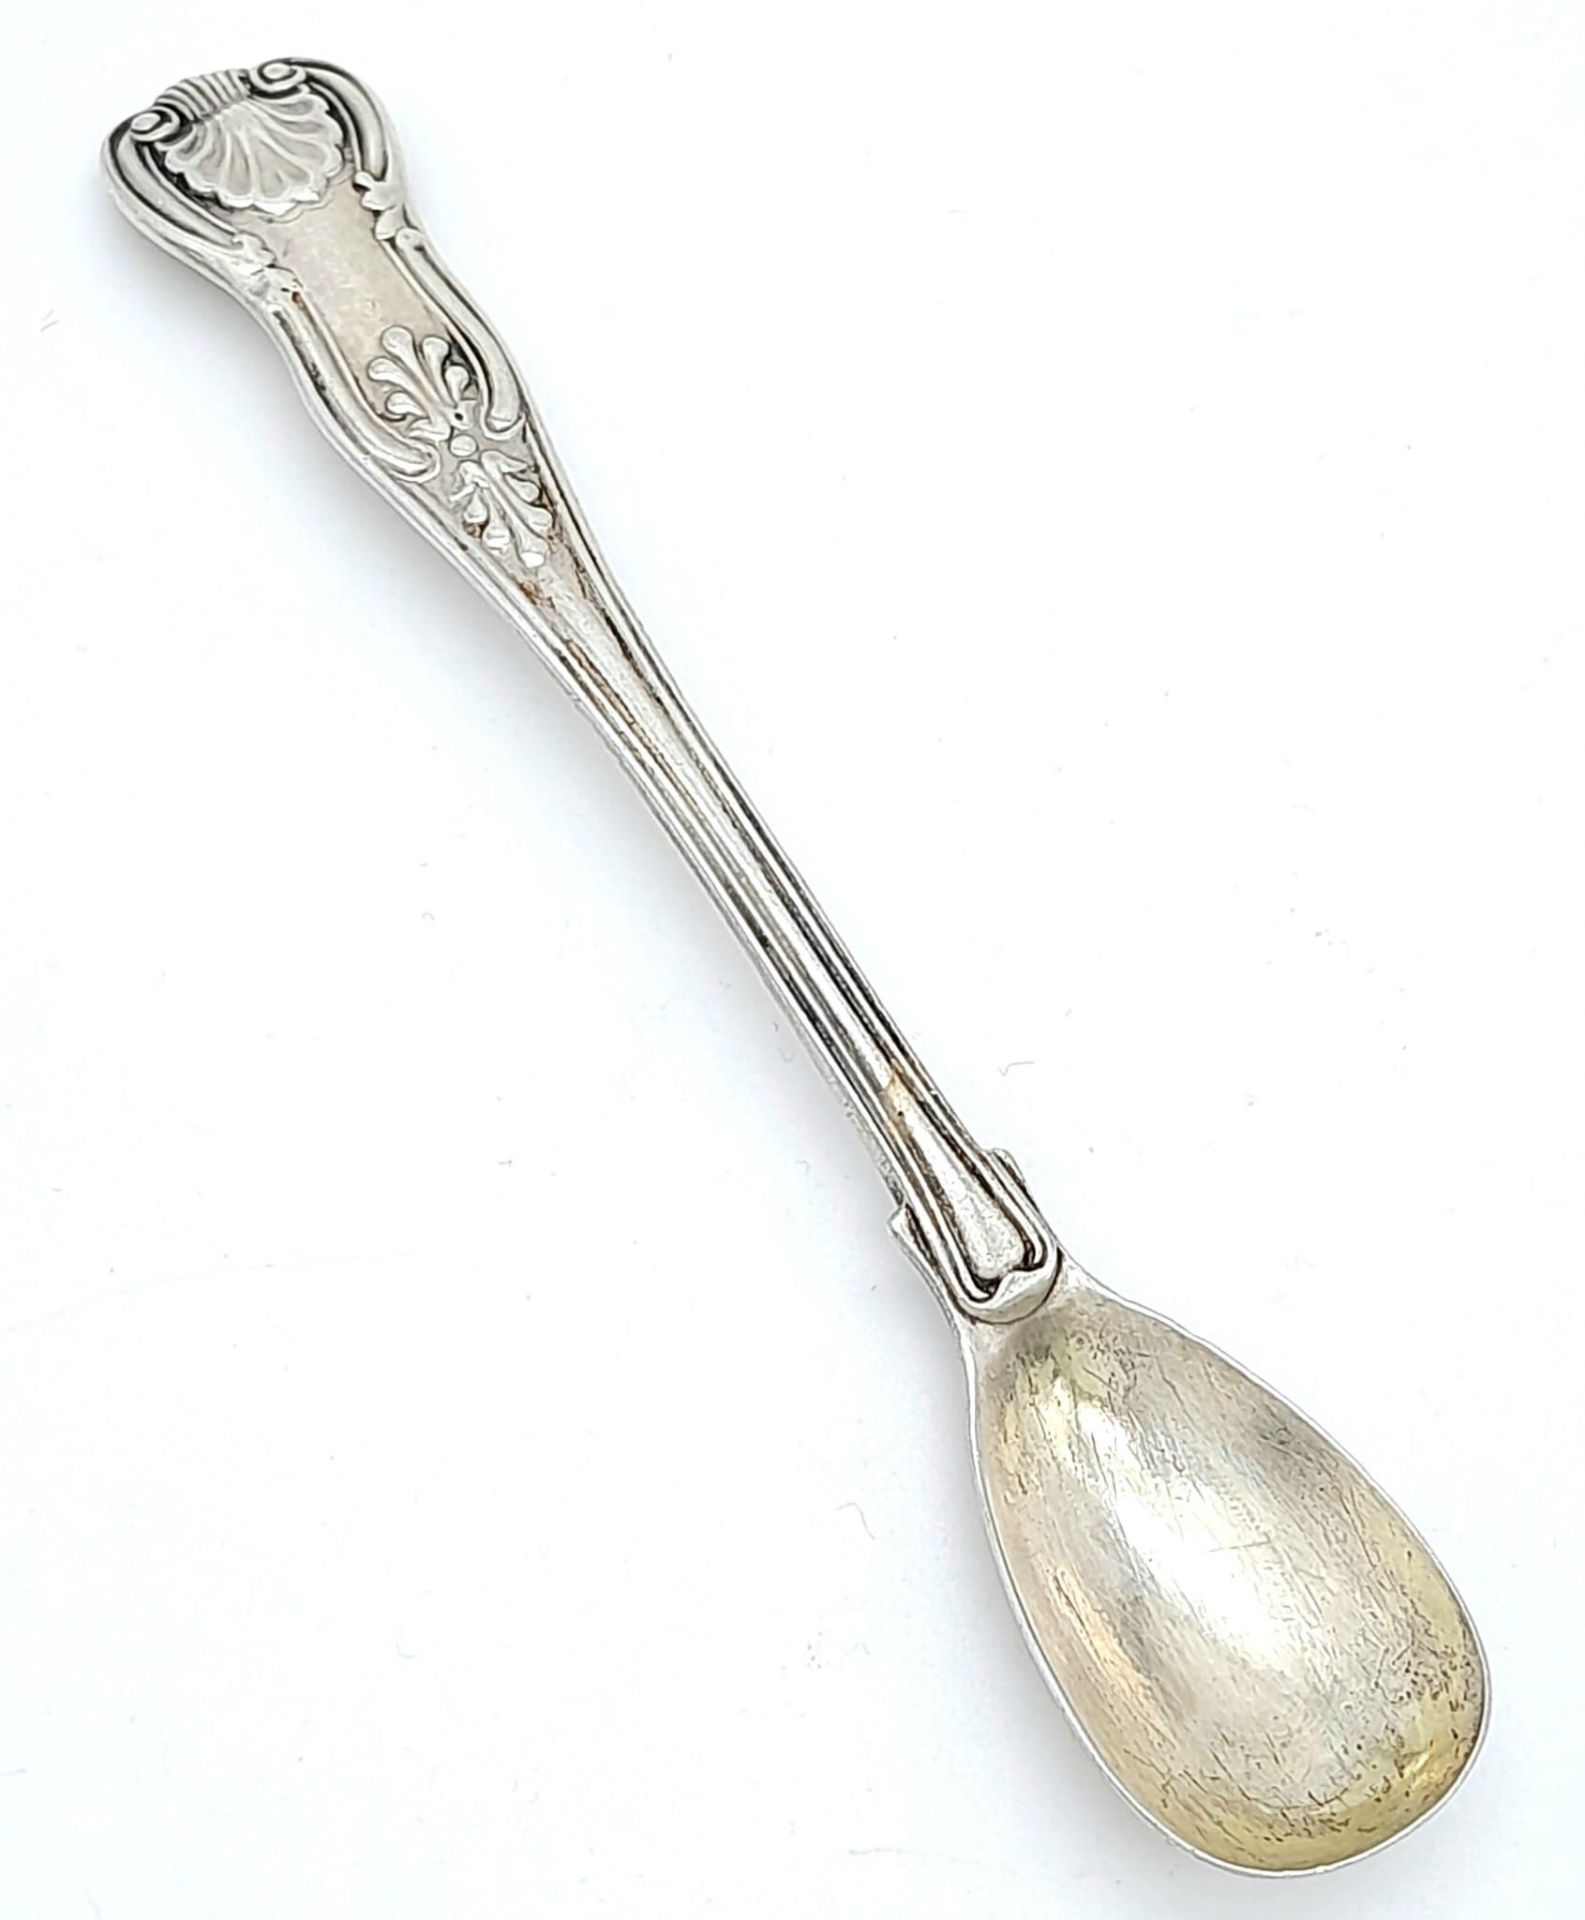 An antique Victorian sterling silver teaspoon with tremendous floral engravings on handle. Come with